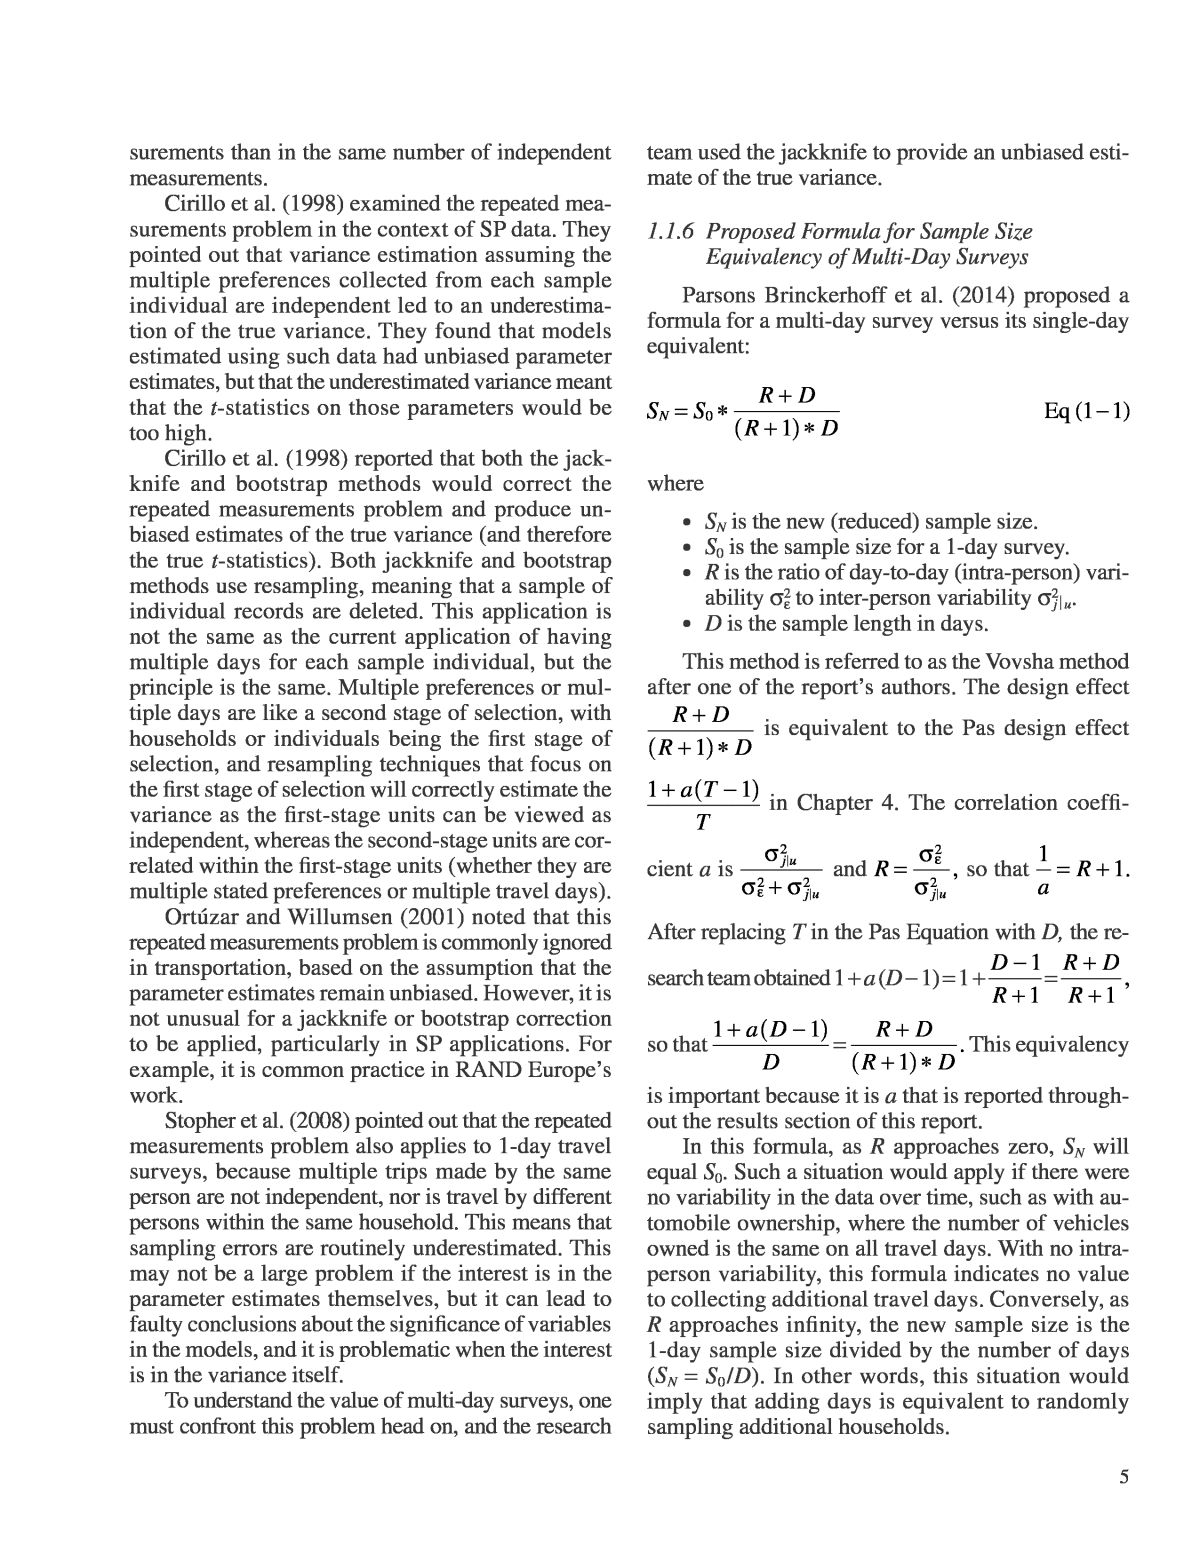 Sample of the implication section from a research paper